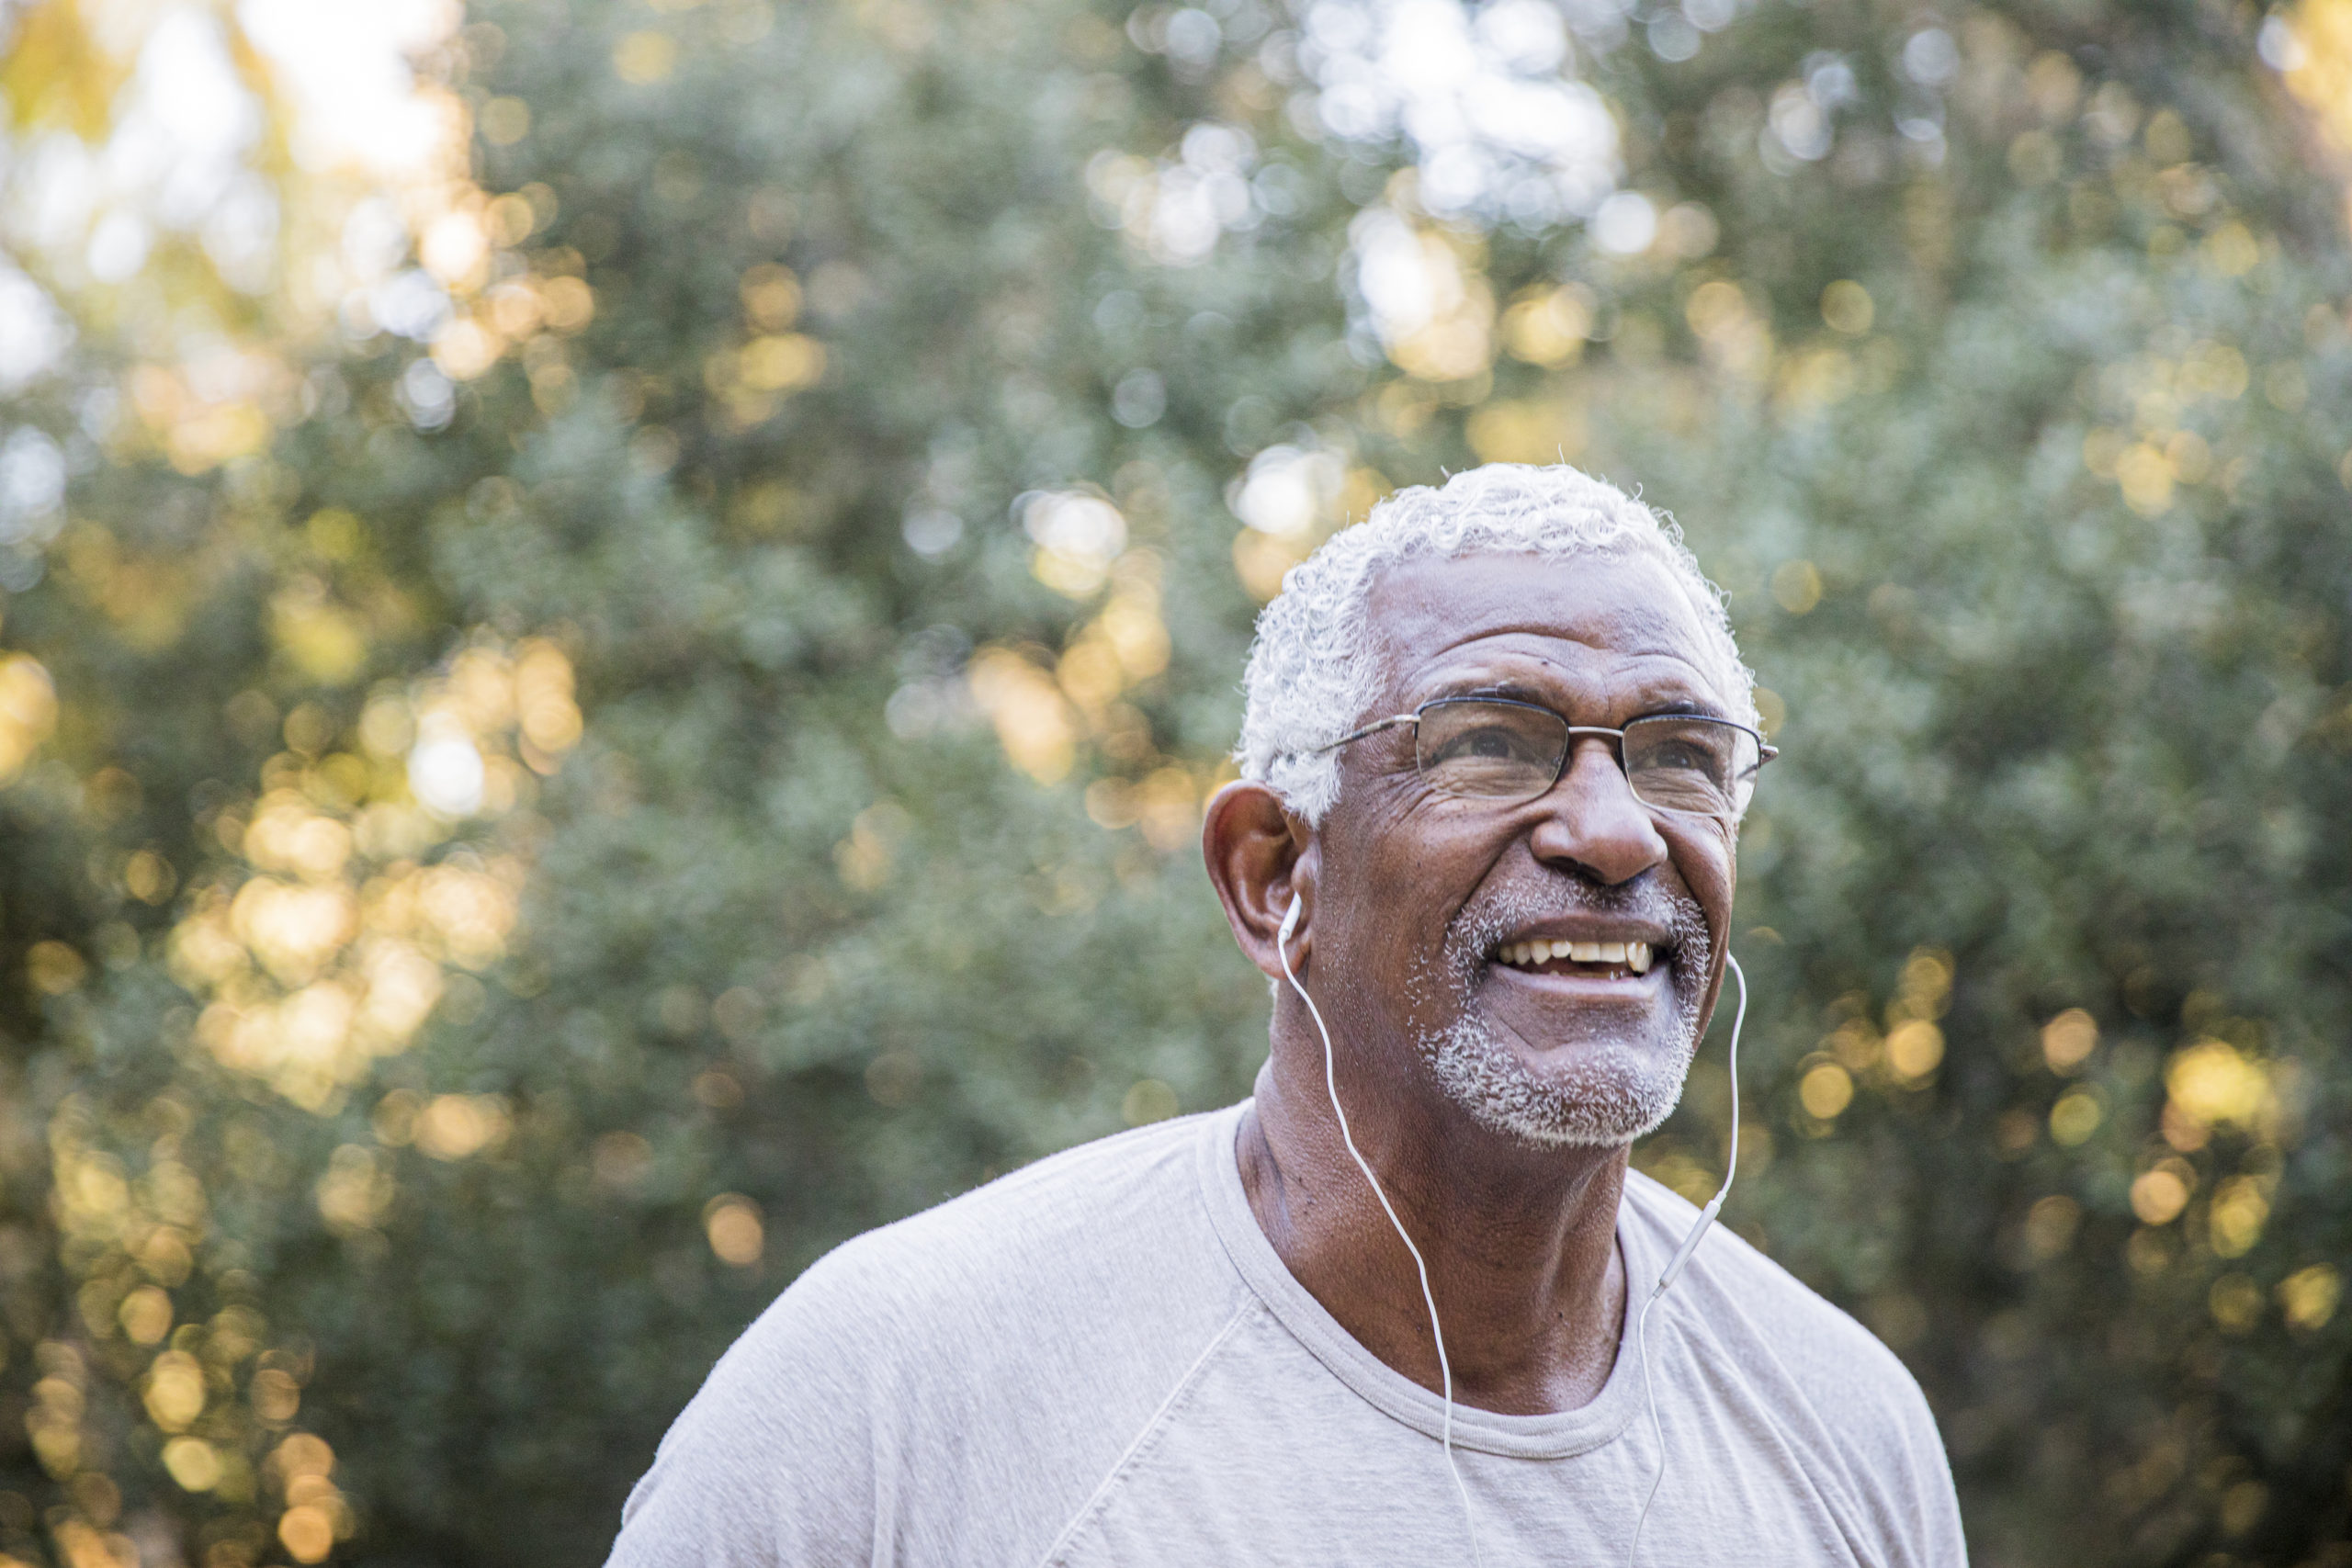 Man running outdoors with headphones in his ears